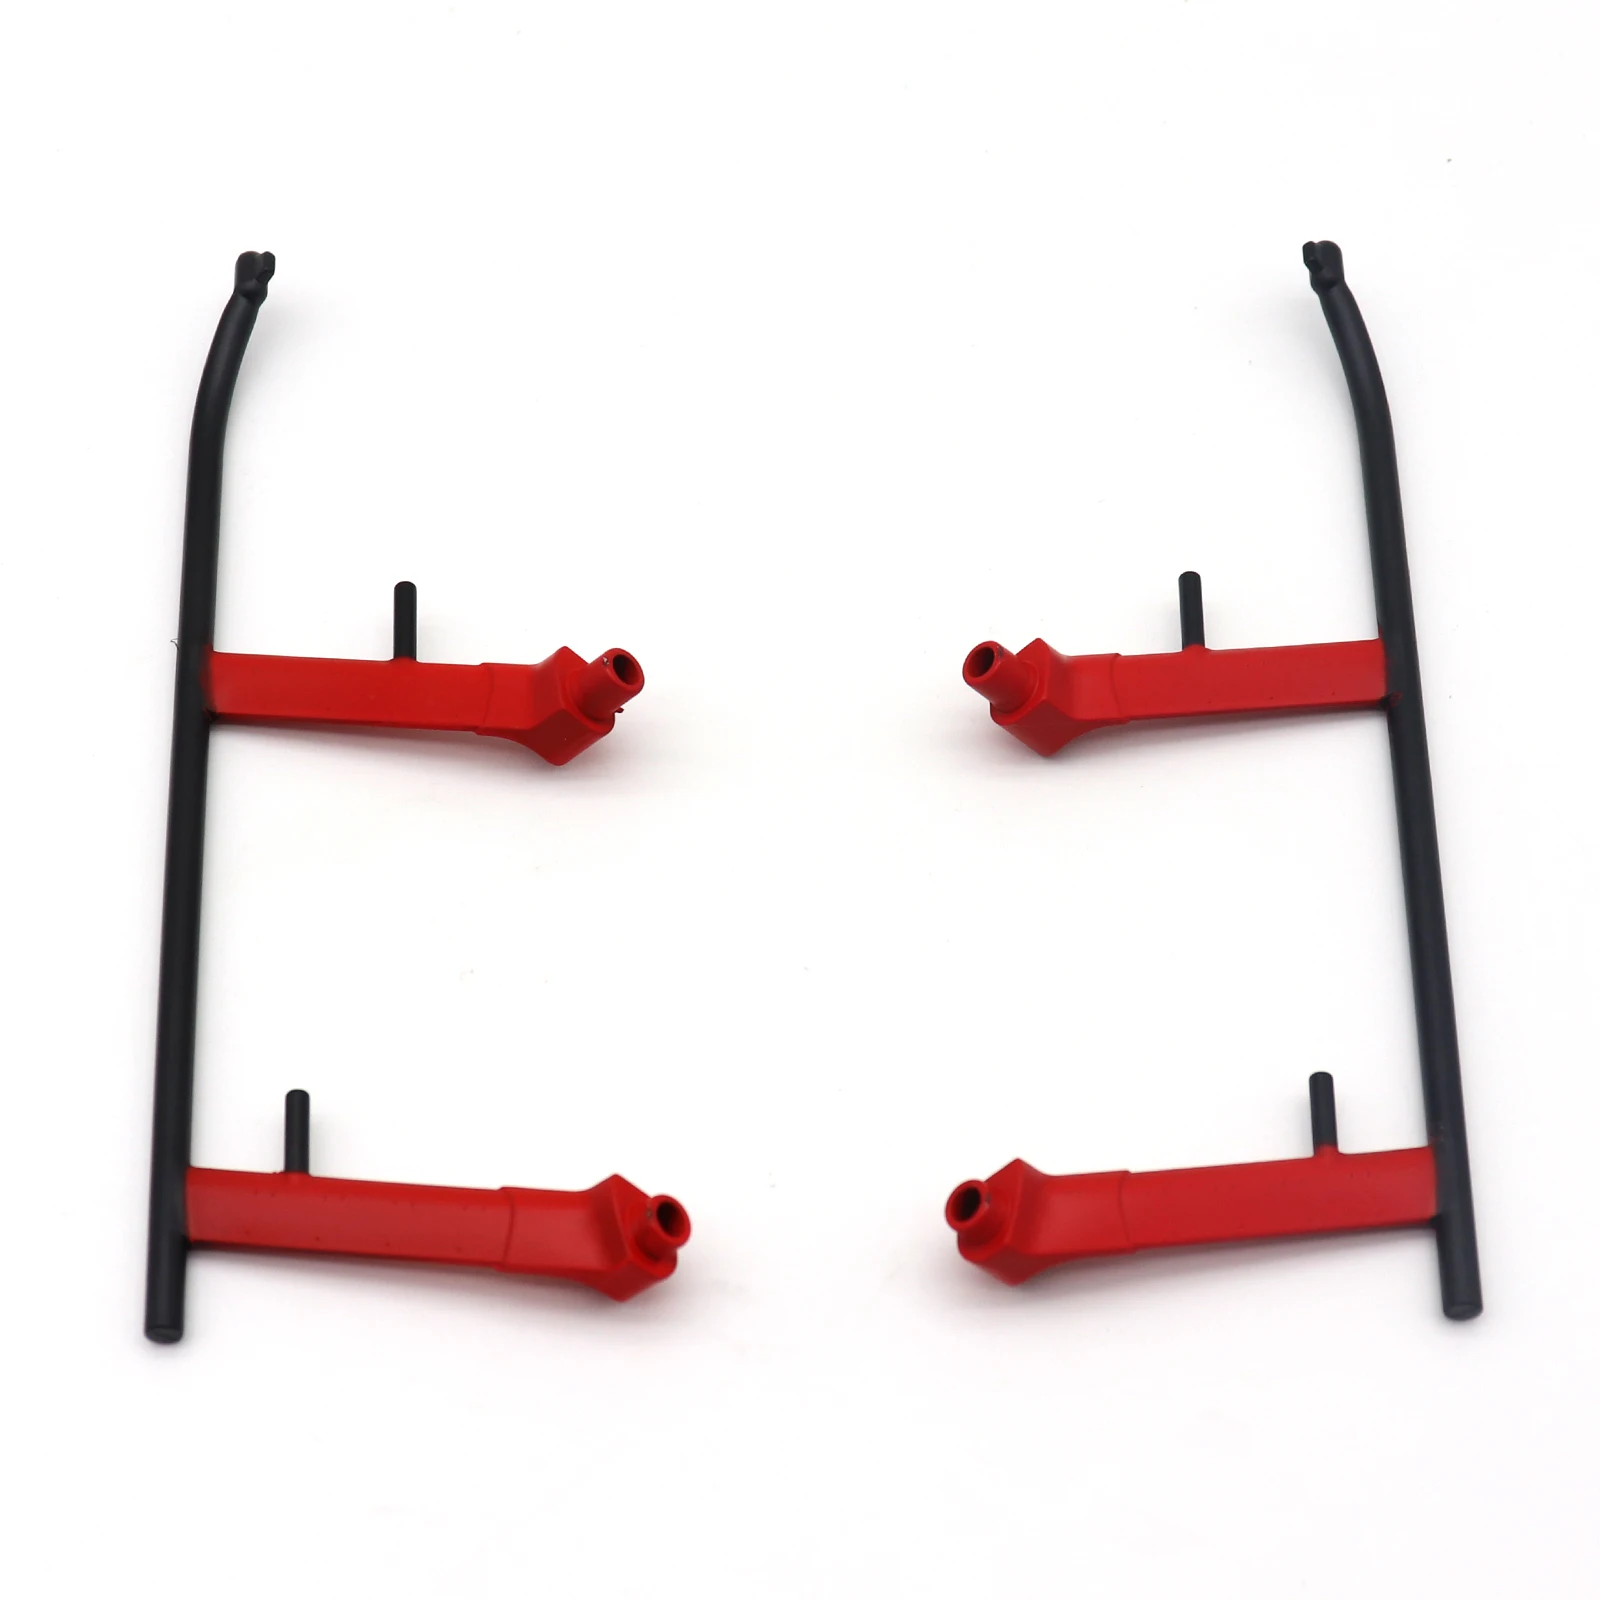 RC ERA for C189 Bird MD500 1:28 Scaled Helicopter body kit Red - $7.96